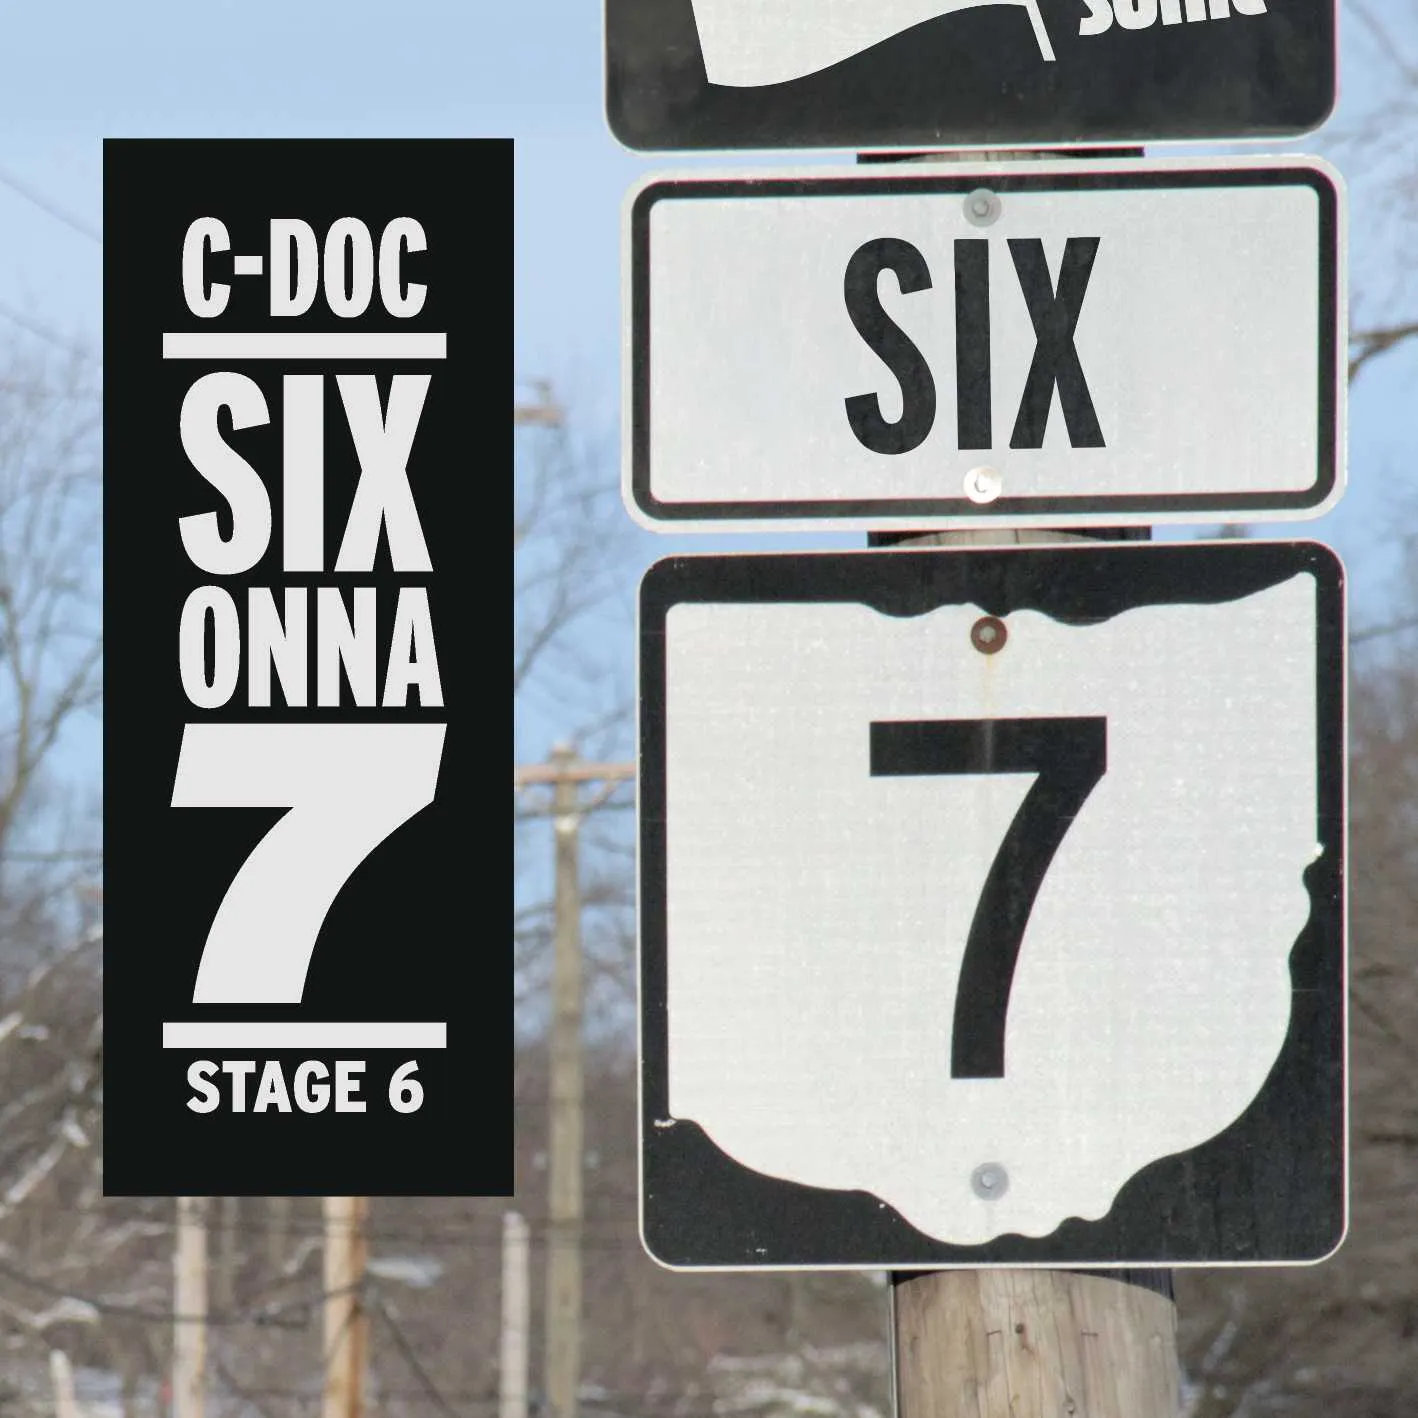 Album cover for “SIX ONNA 7 (Stage 6)” by C-Doc